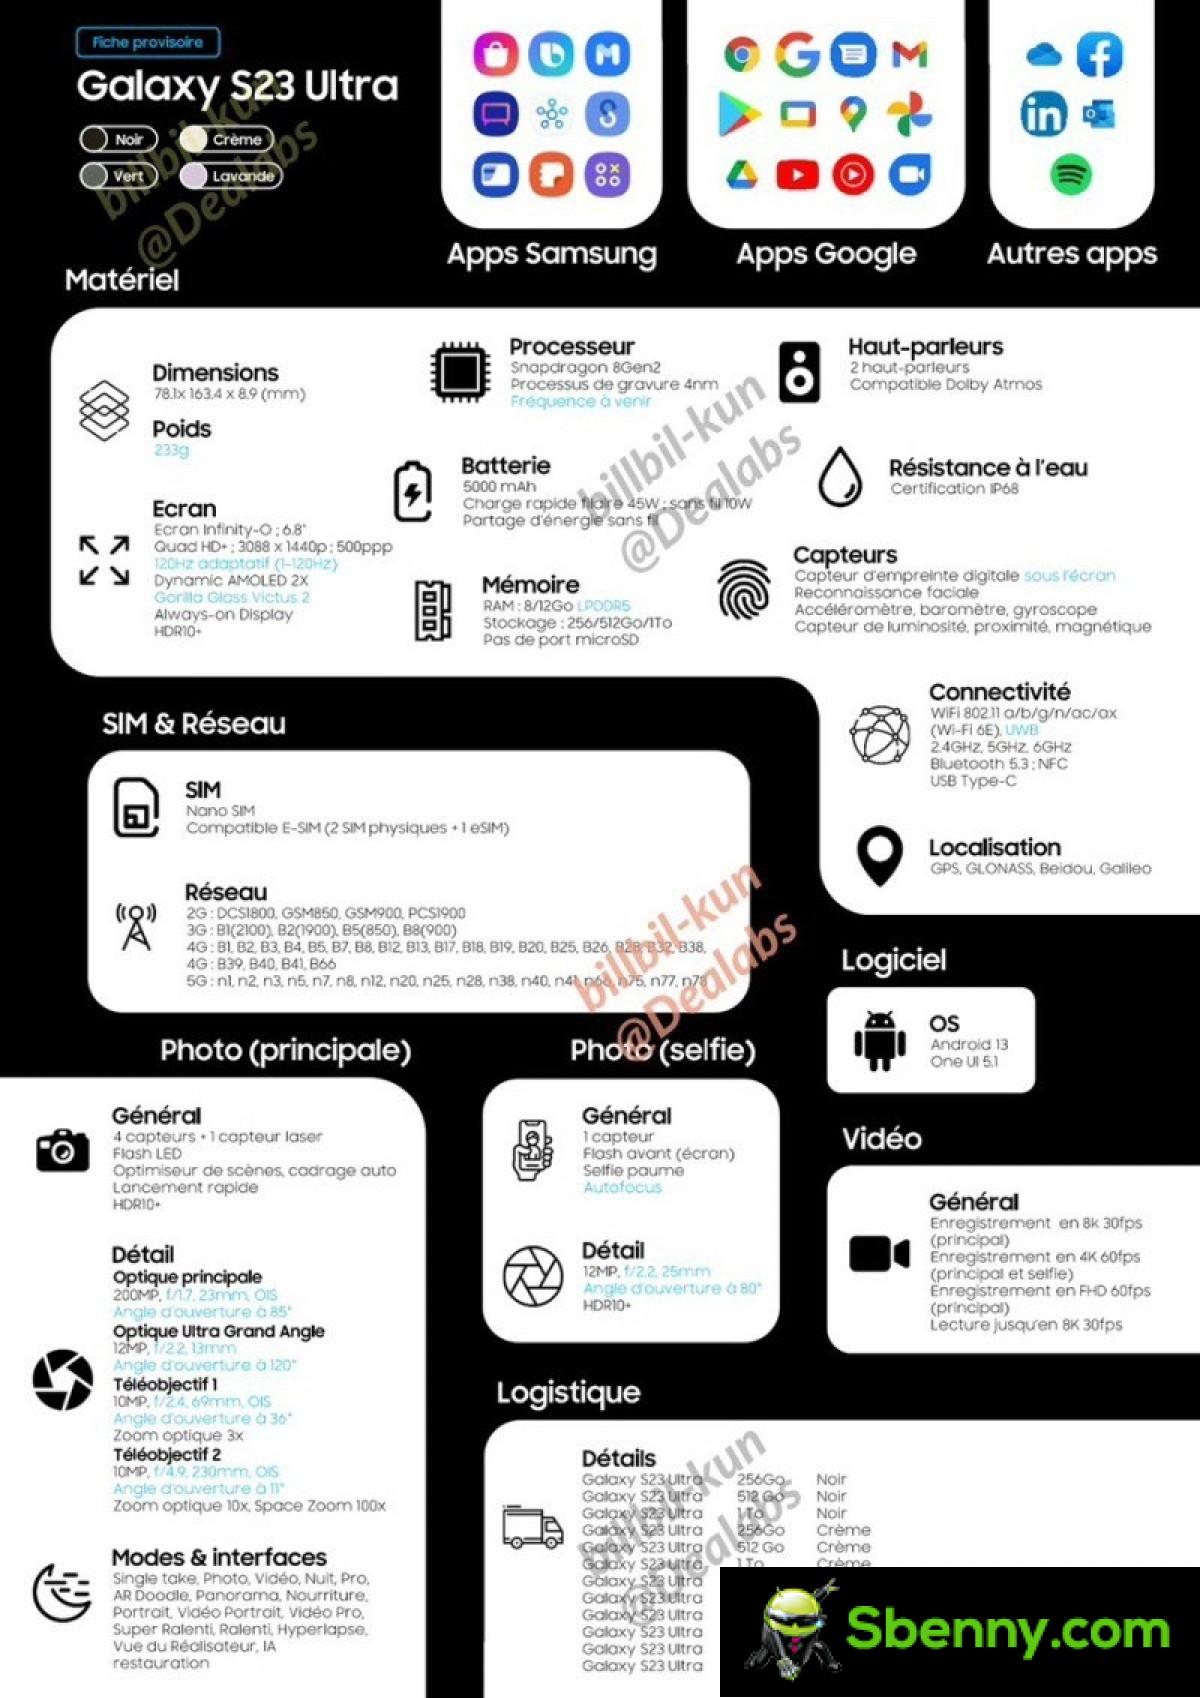 The technical sheet of the Samsung Galaxy S23 Ultra leaks in full